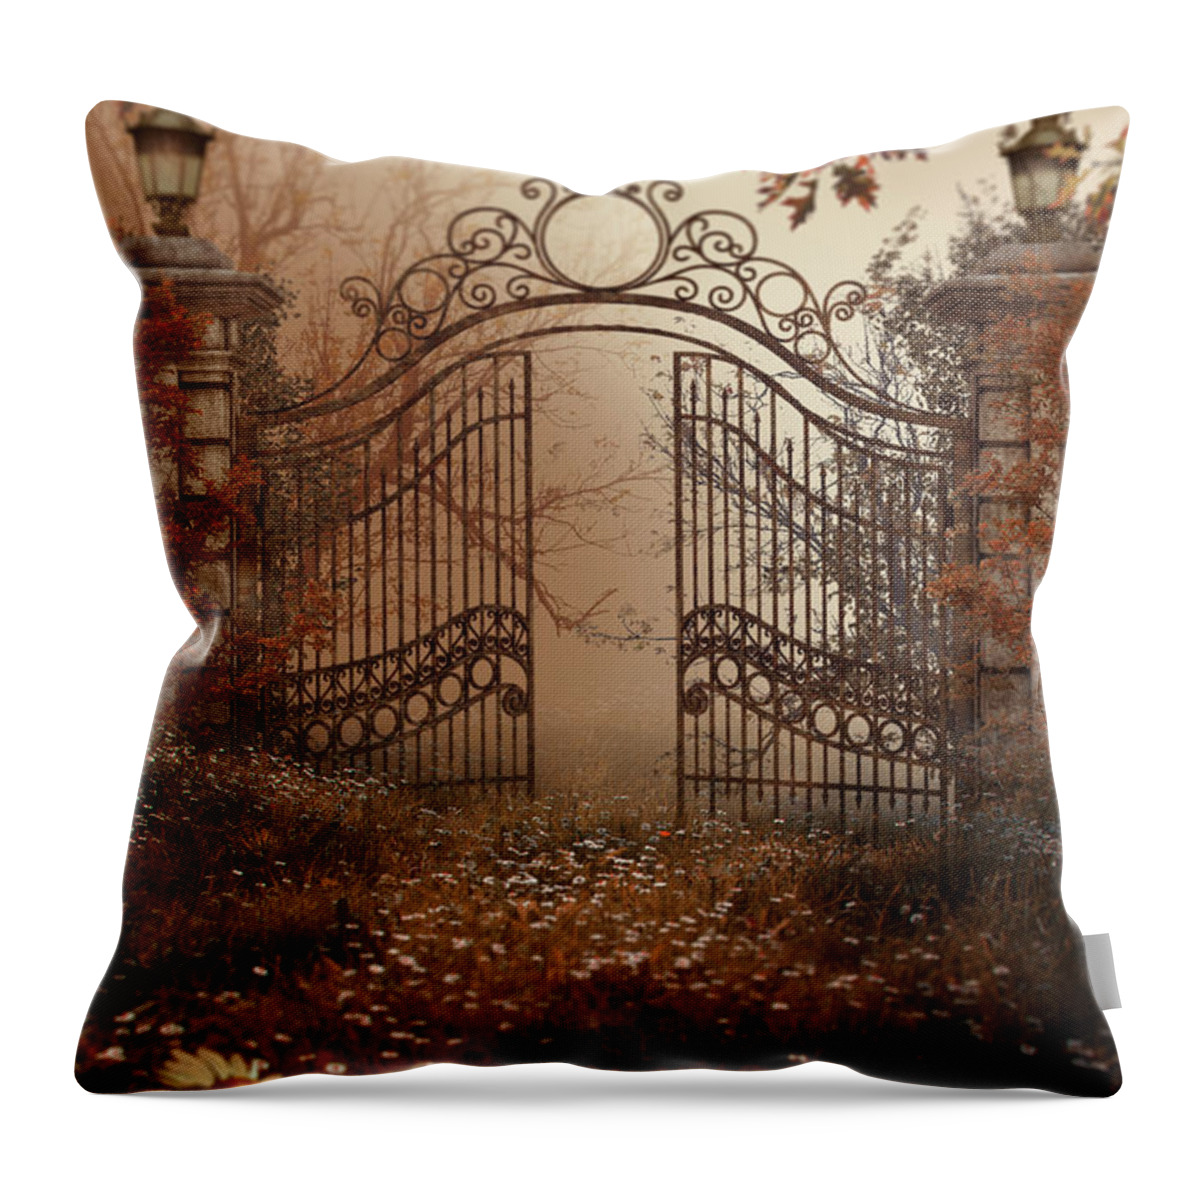 Creepy Throw Pillow featuring the photograph Creepy Old Gates Set In Overgrown Estate by Ethiriel Photography